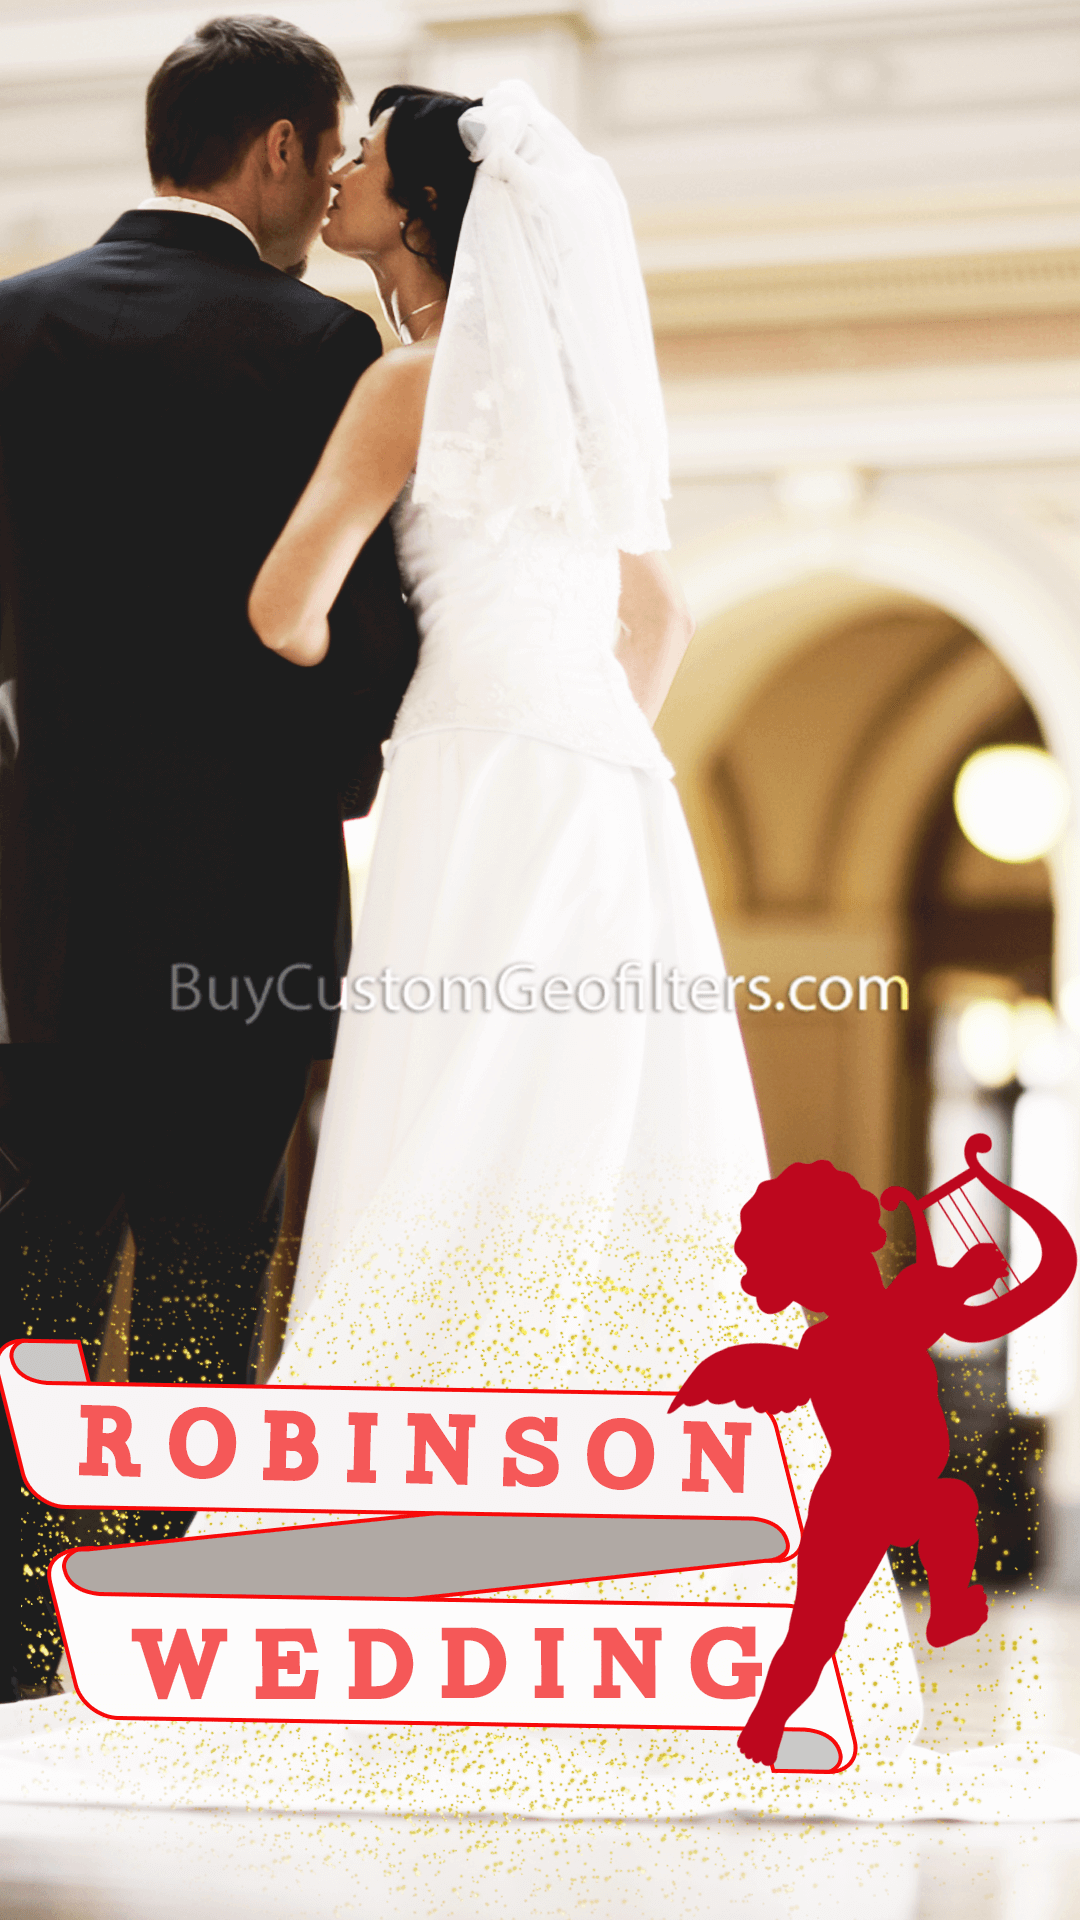 snapchat-wedding-geofilters-for-robinson-wedding.png